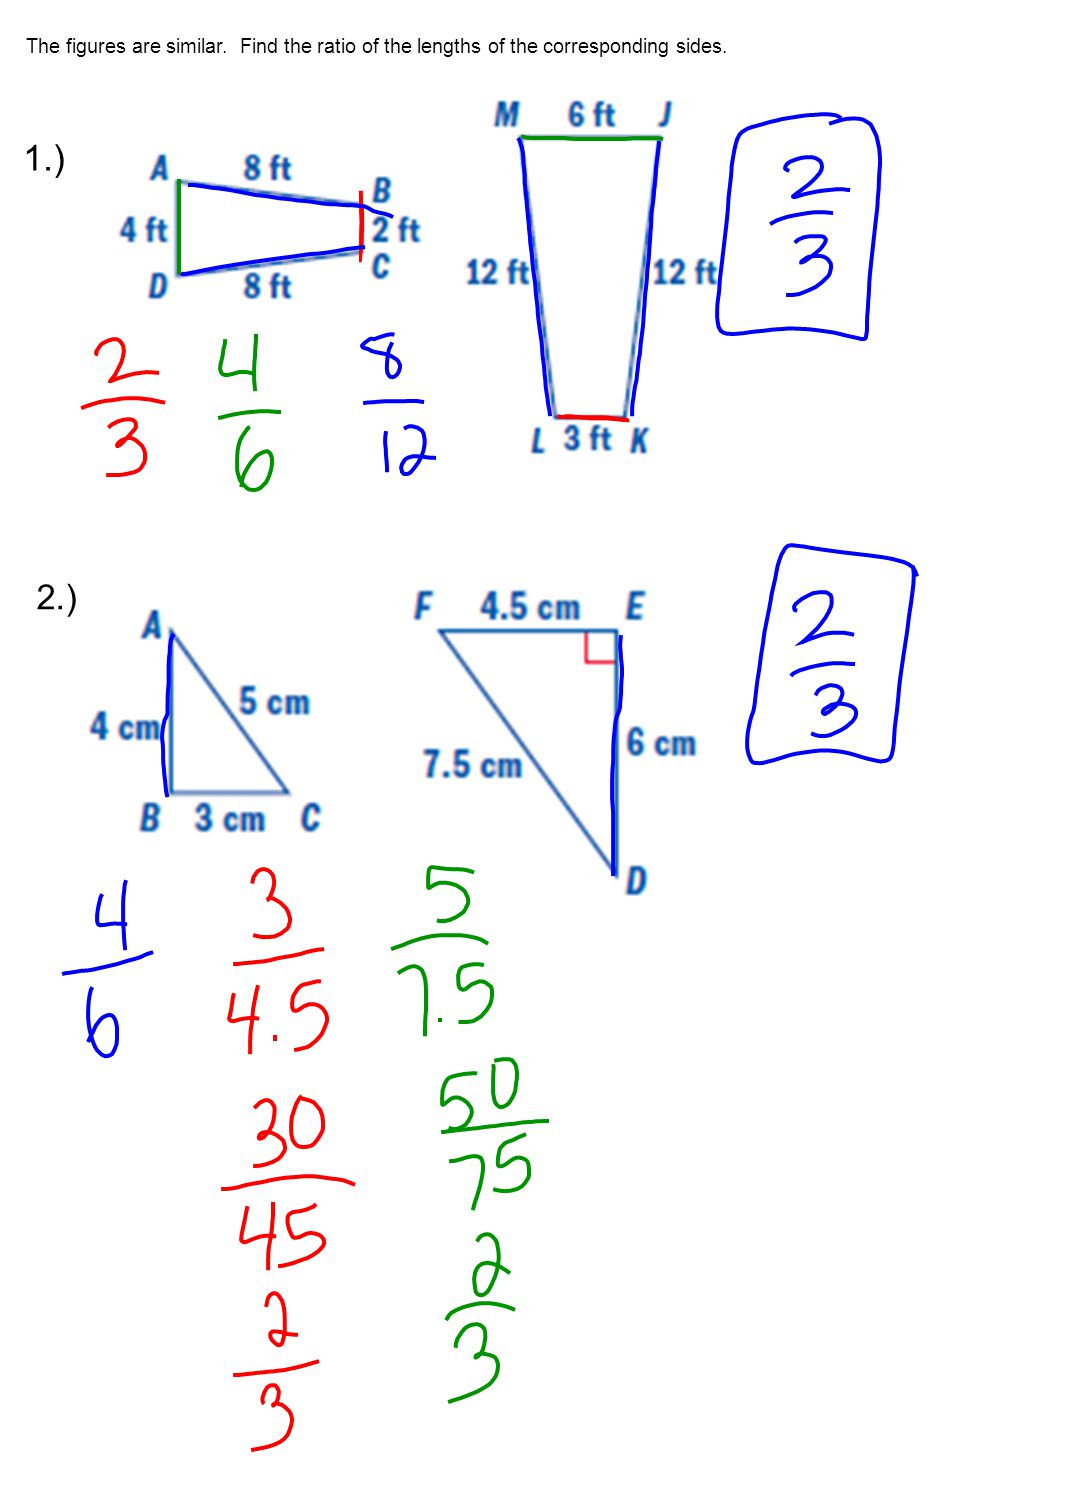 2.) 1.) The figures are similar. Find the ratio of the lengths of the corresponding sides.